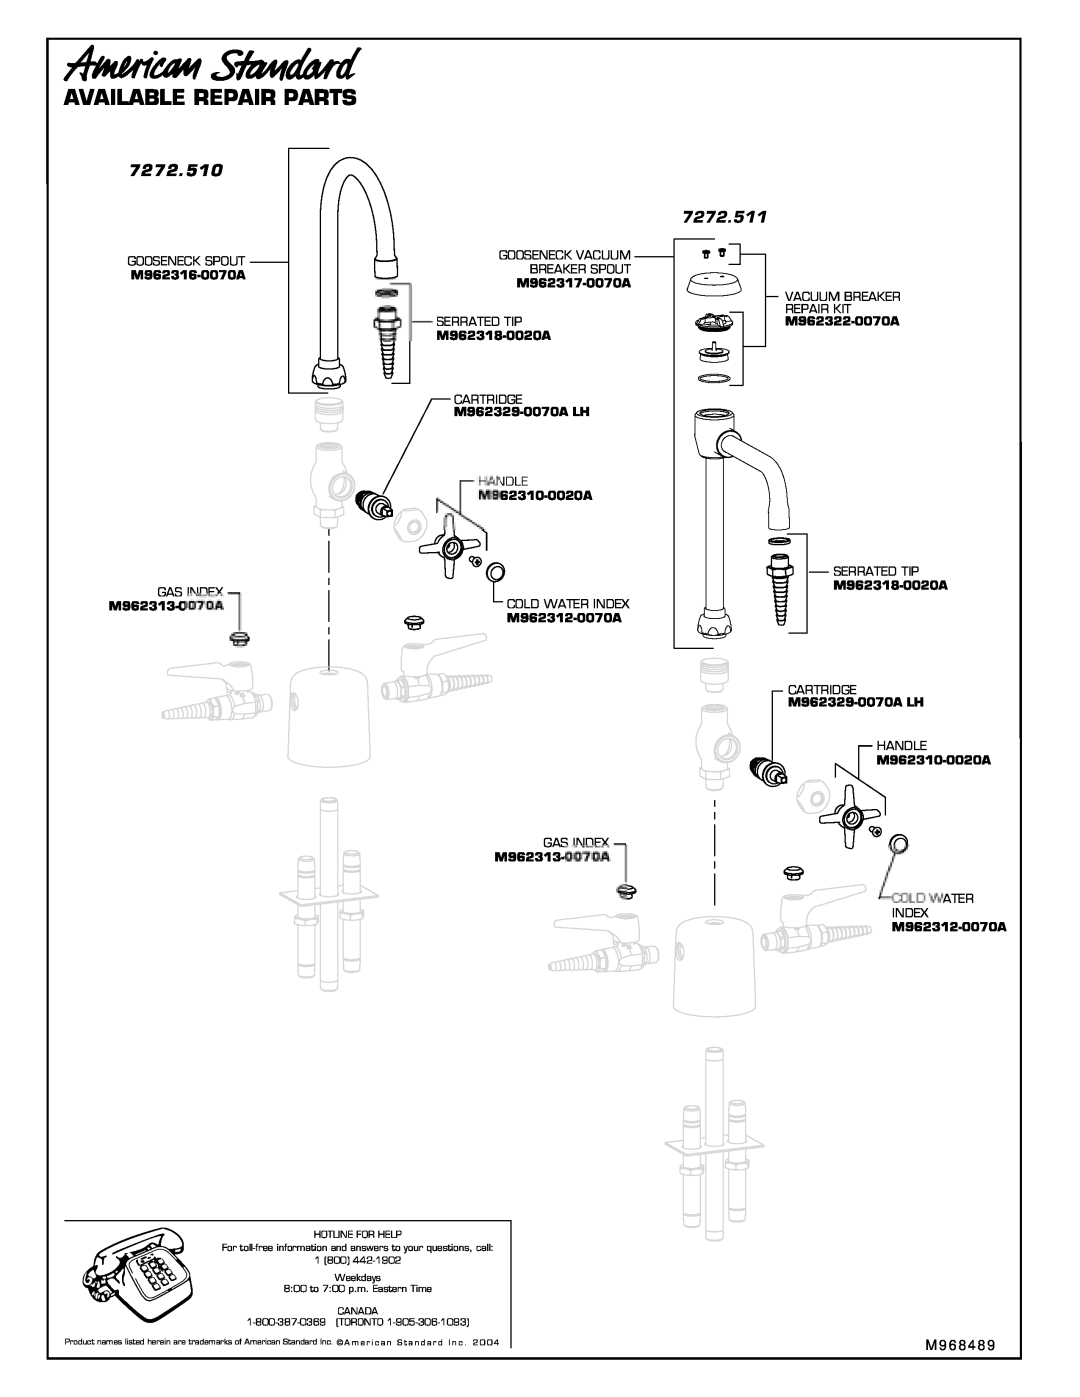 American Standard 7272.510, 7272.511 installation instructions Available Repair Parts 